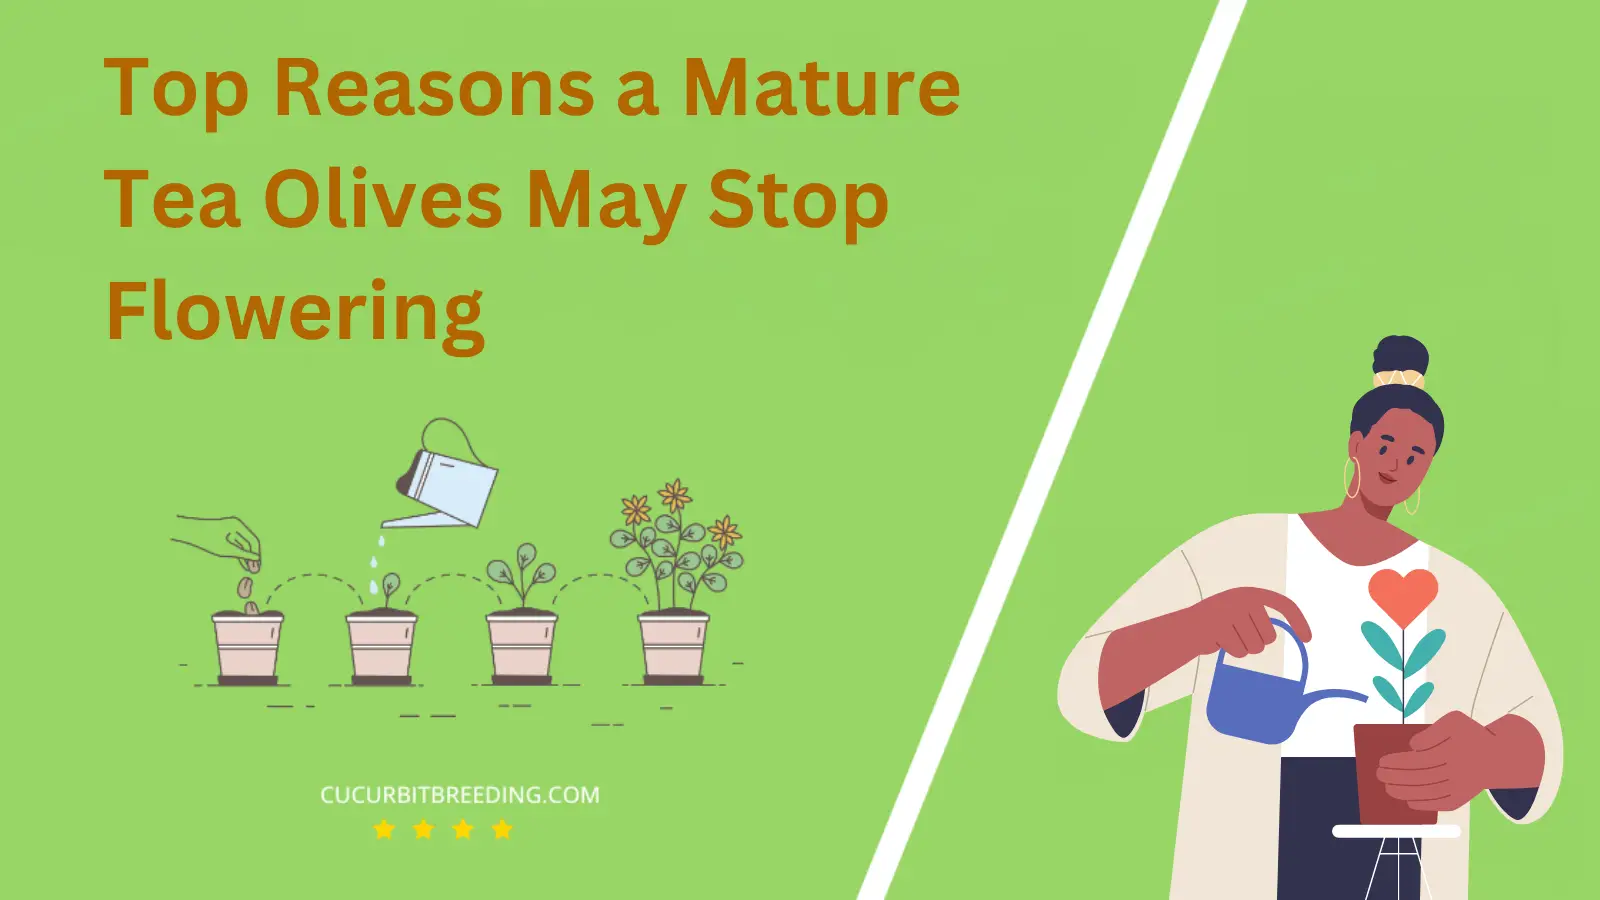 Top Reasons a Mature Tea Olives May Stop Flowering